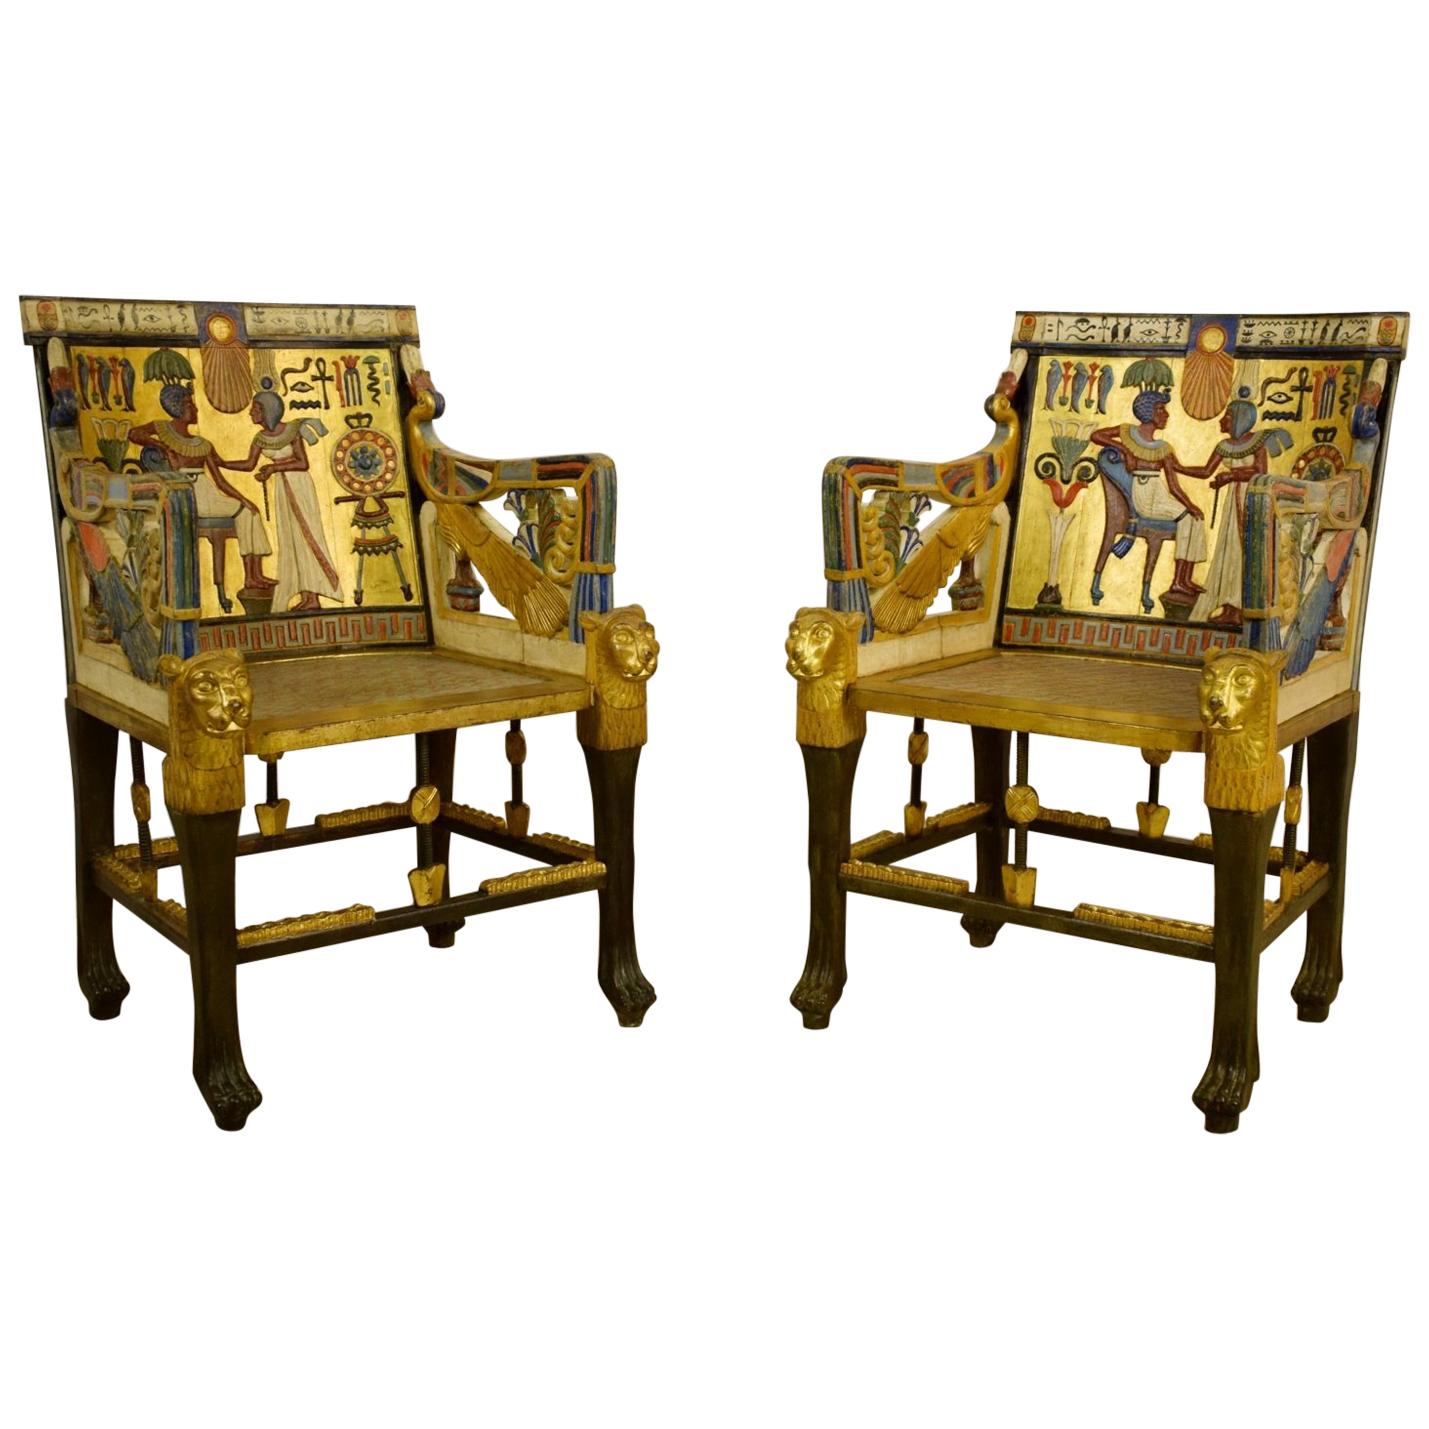 20th Century, Pair of Lacquered Giltwood Armchairs in Egyptian Revival Style For Sale